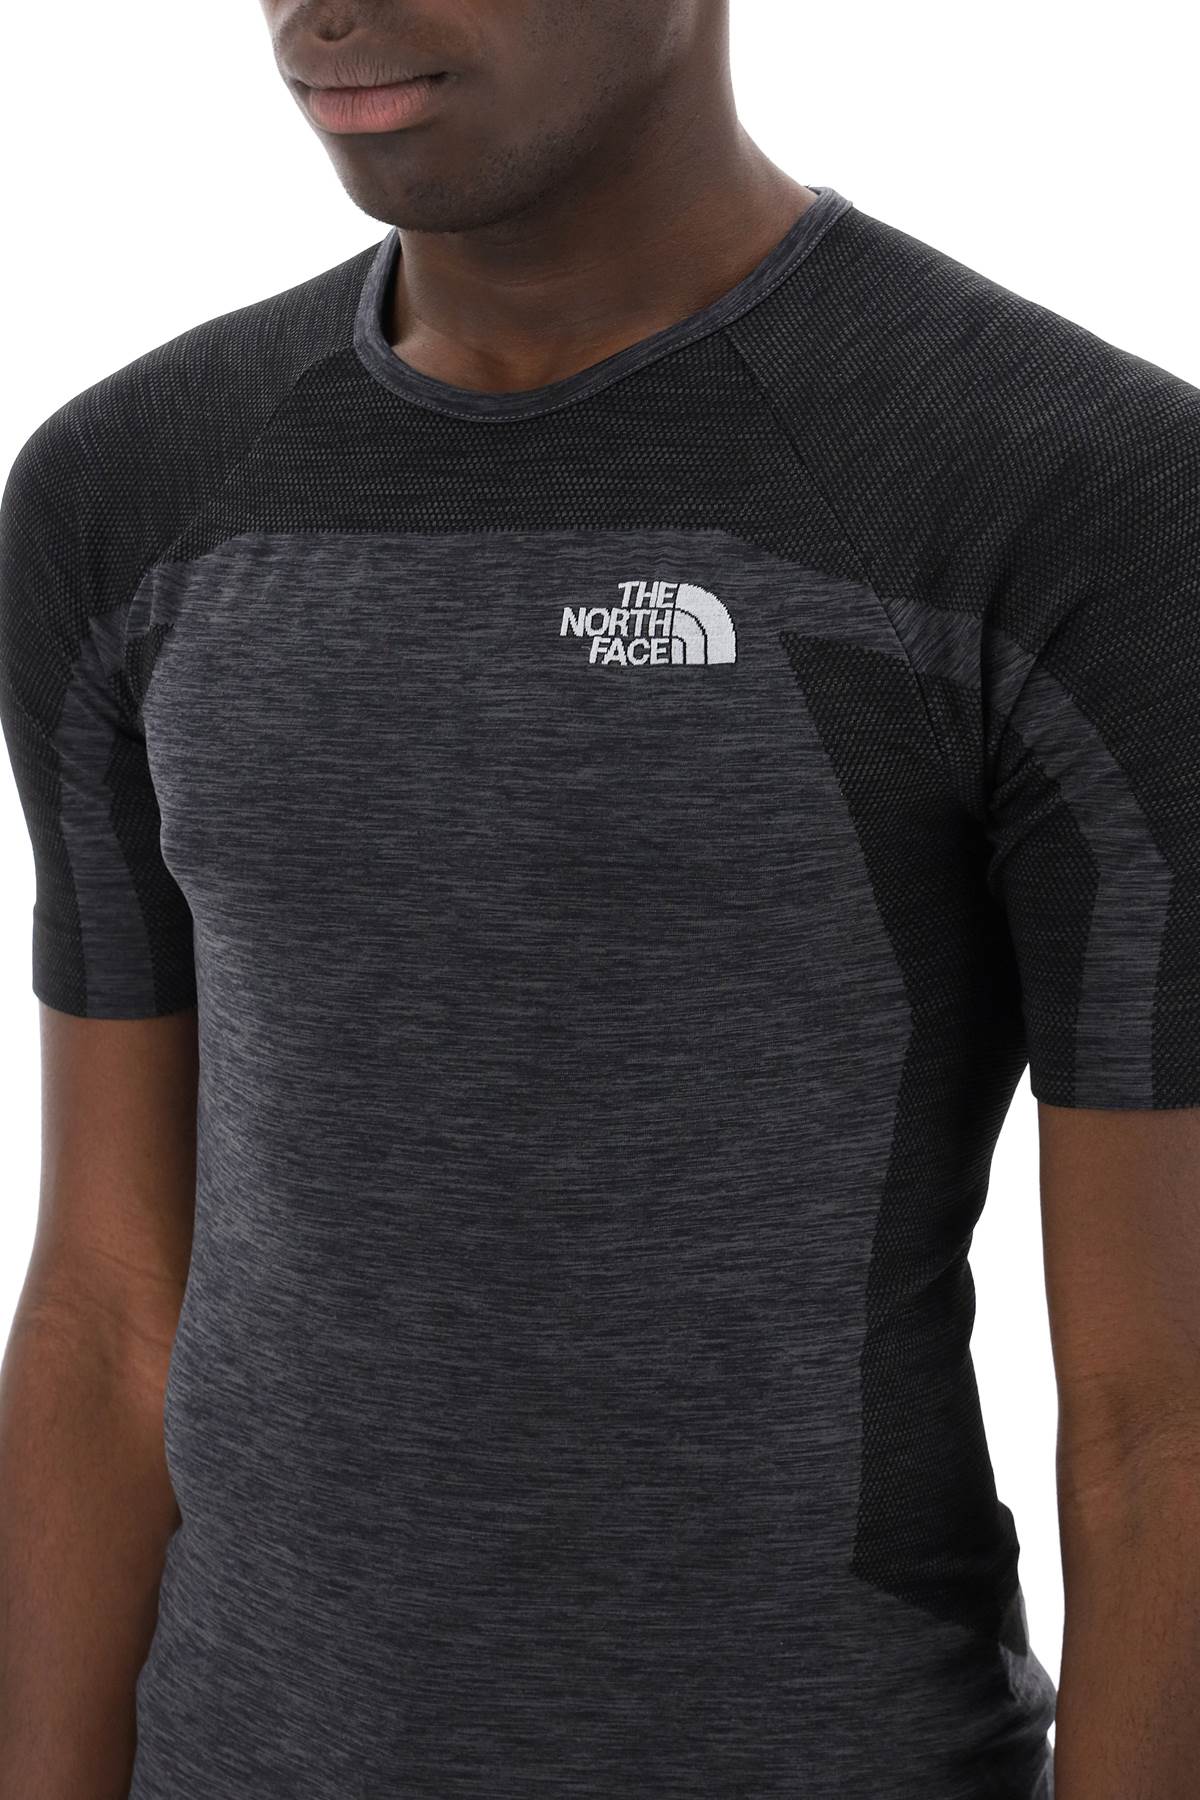 The north face "seamless mountain athletics lab t-3